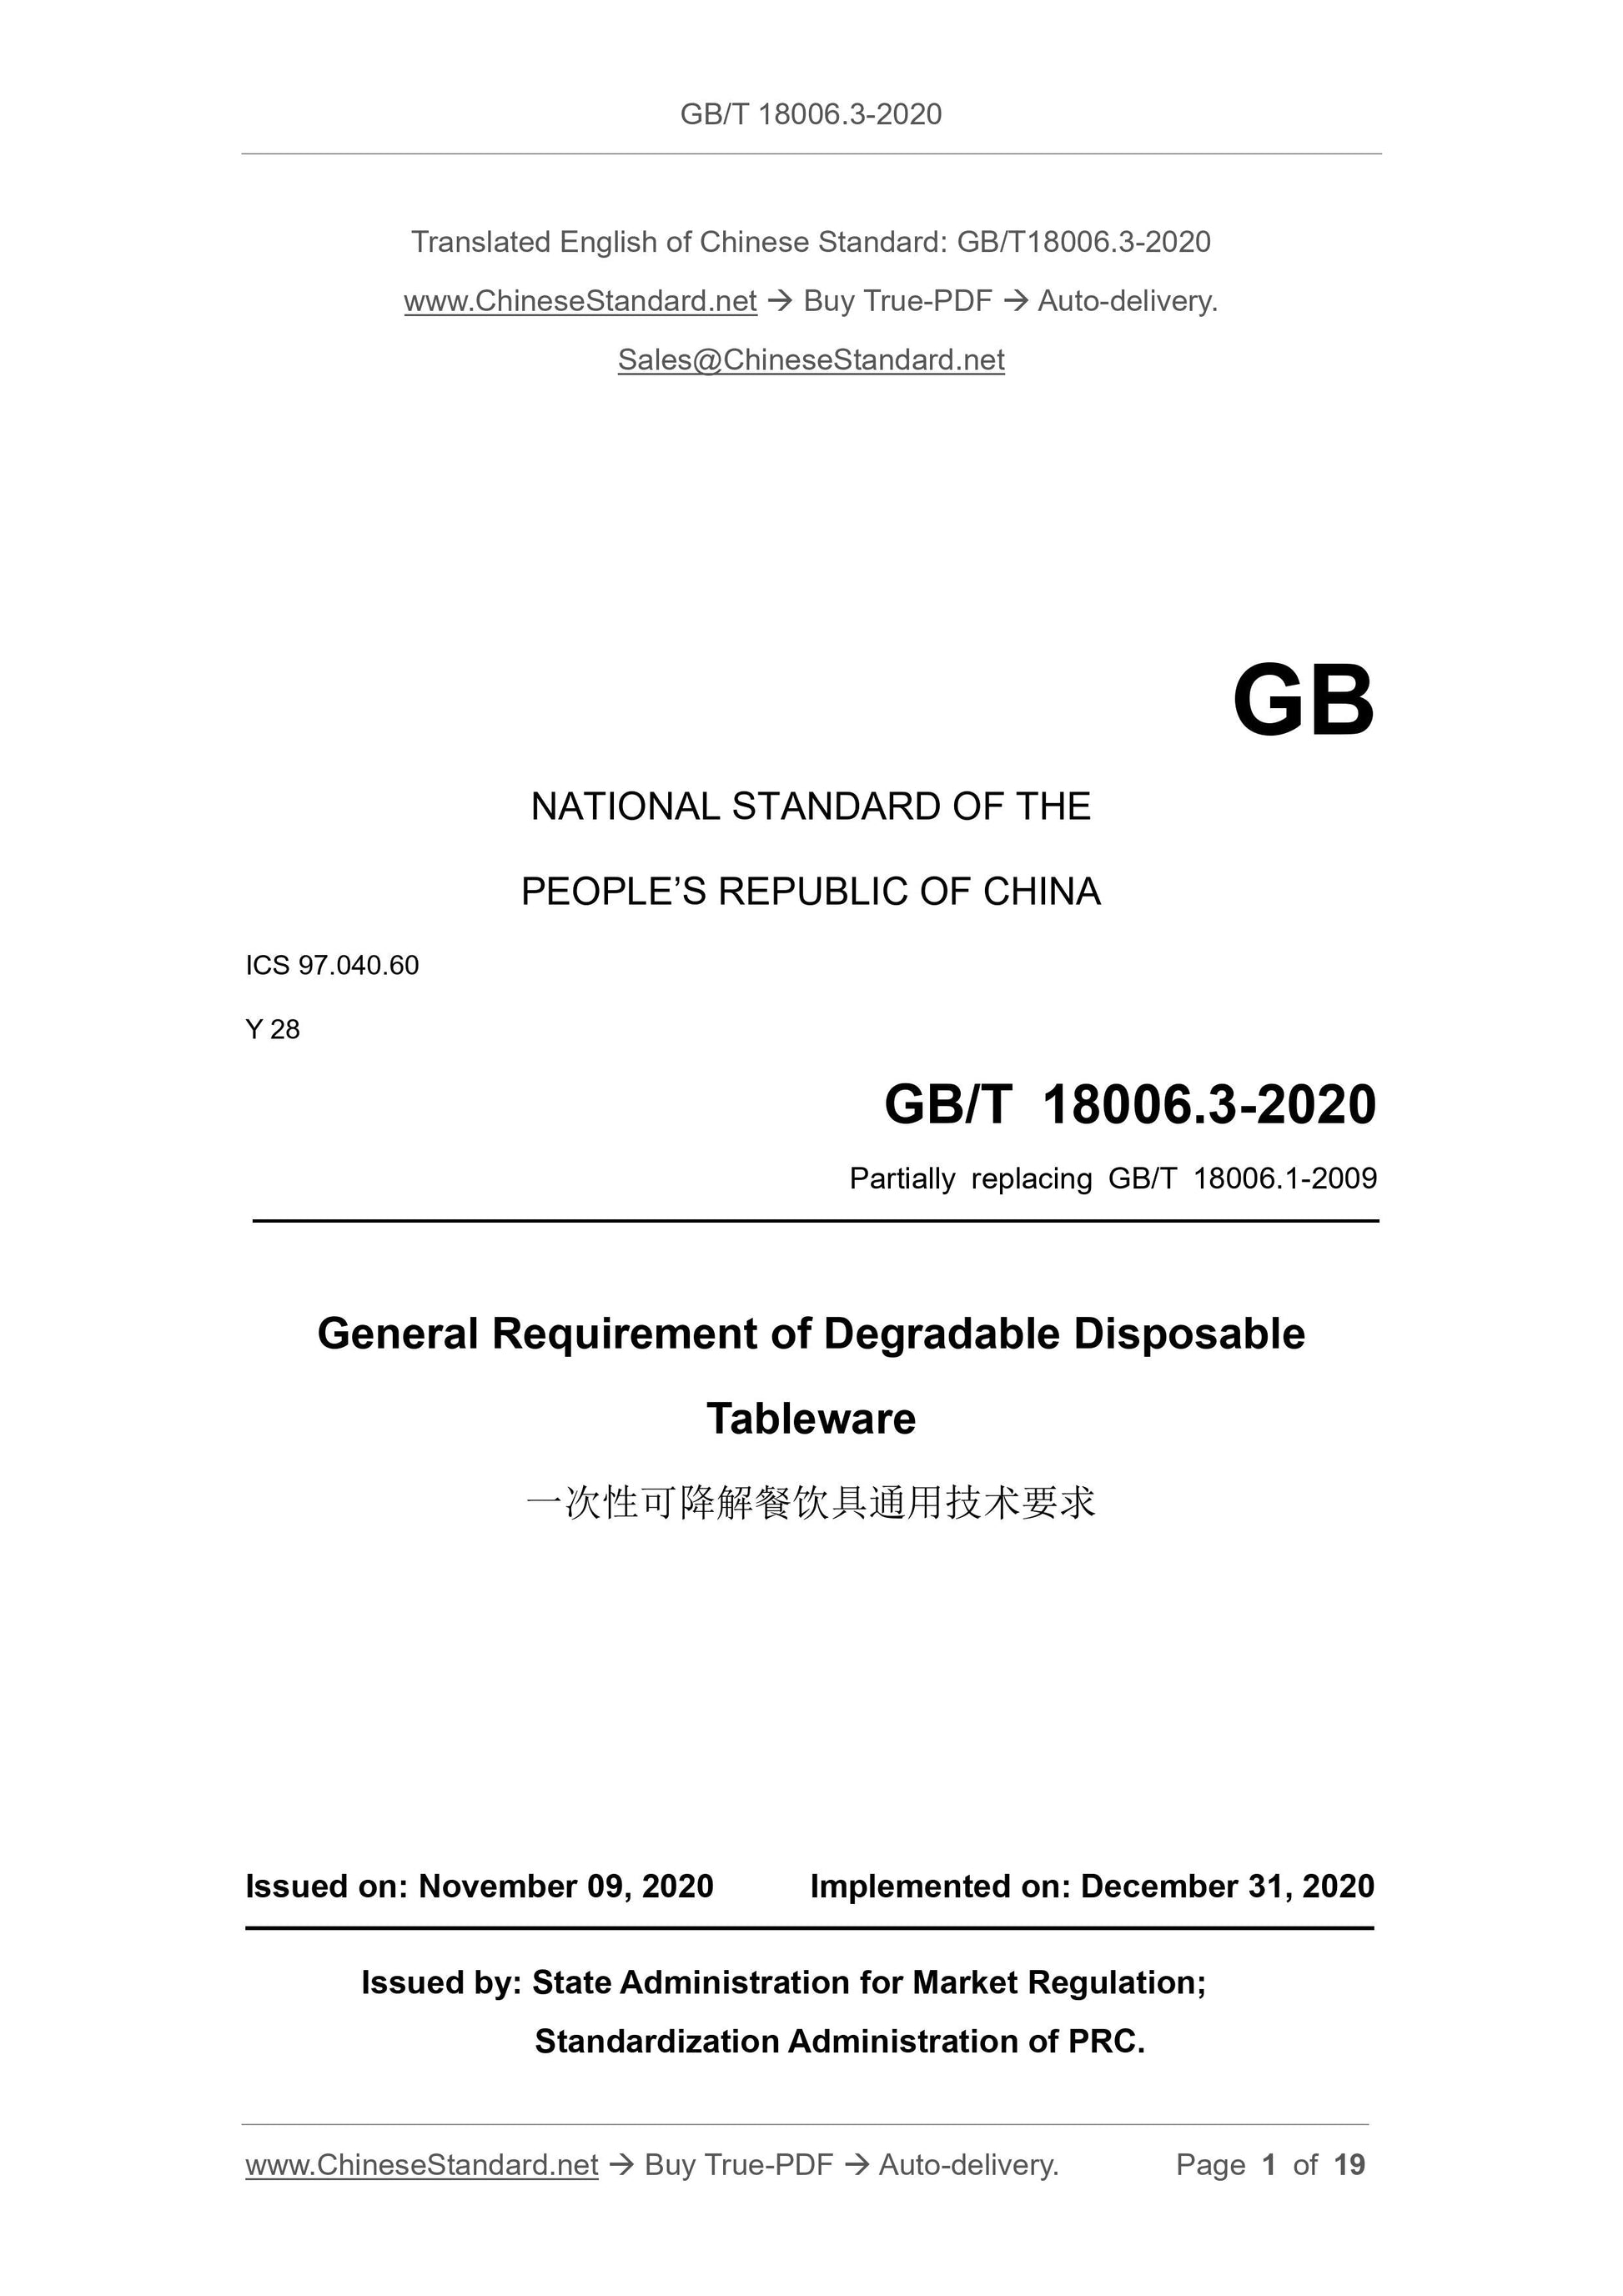 GB/T 18006.3-2020 Page 1